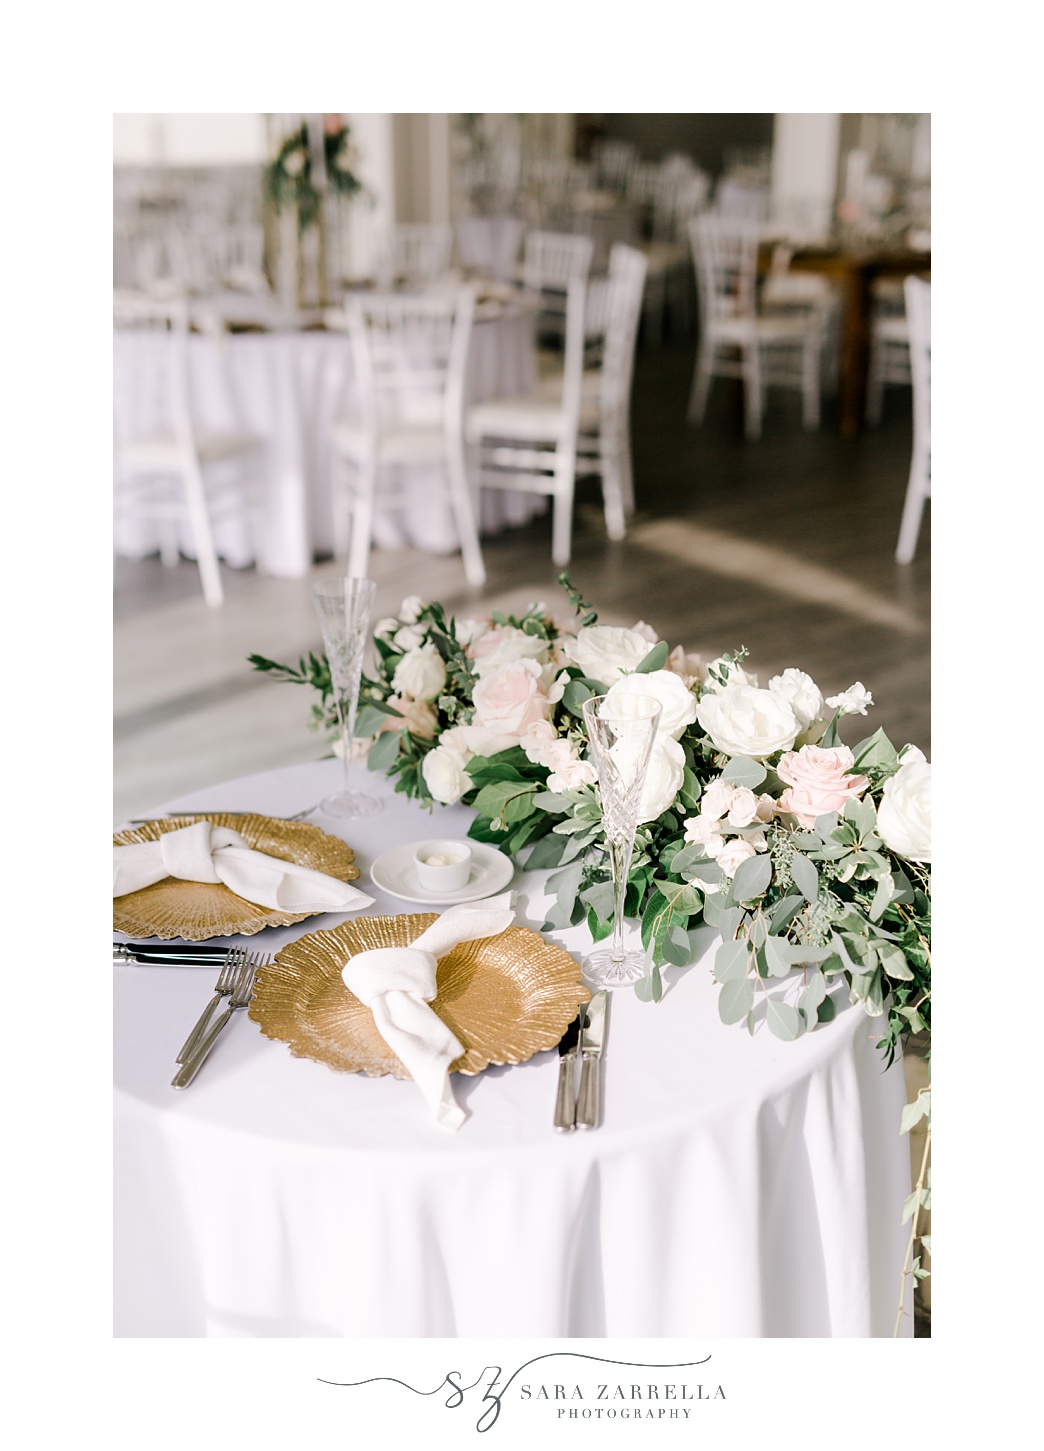 sweetheart table for summer wedding reception at Belle Mer Island House with white floral arrangement and gold chargers 